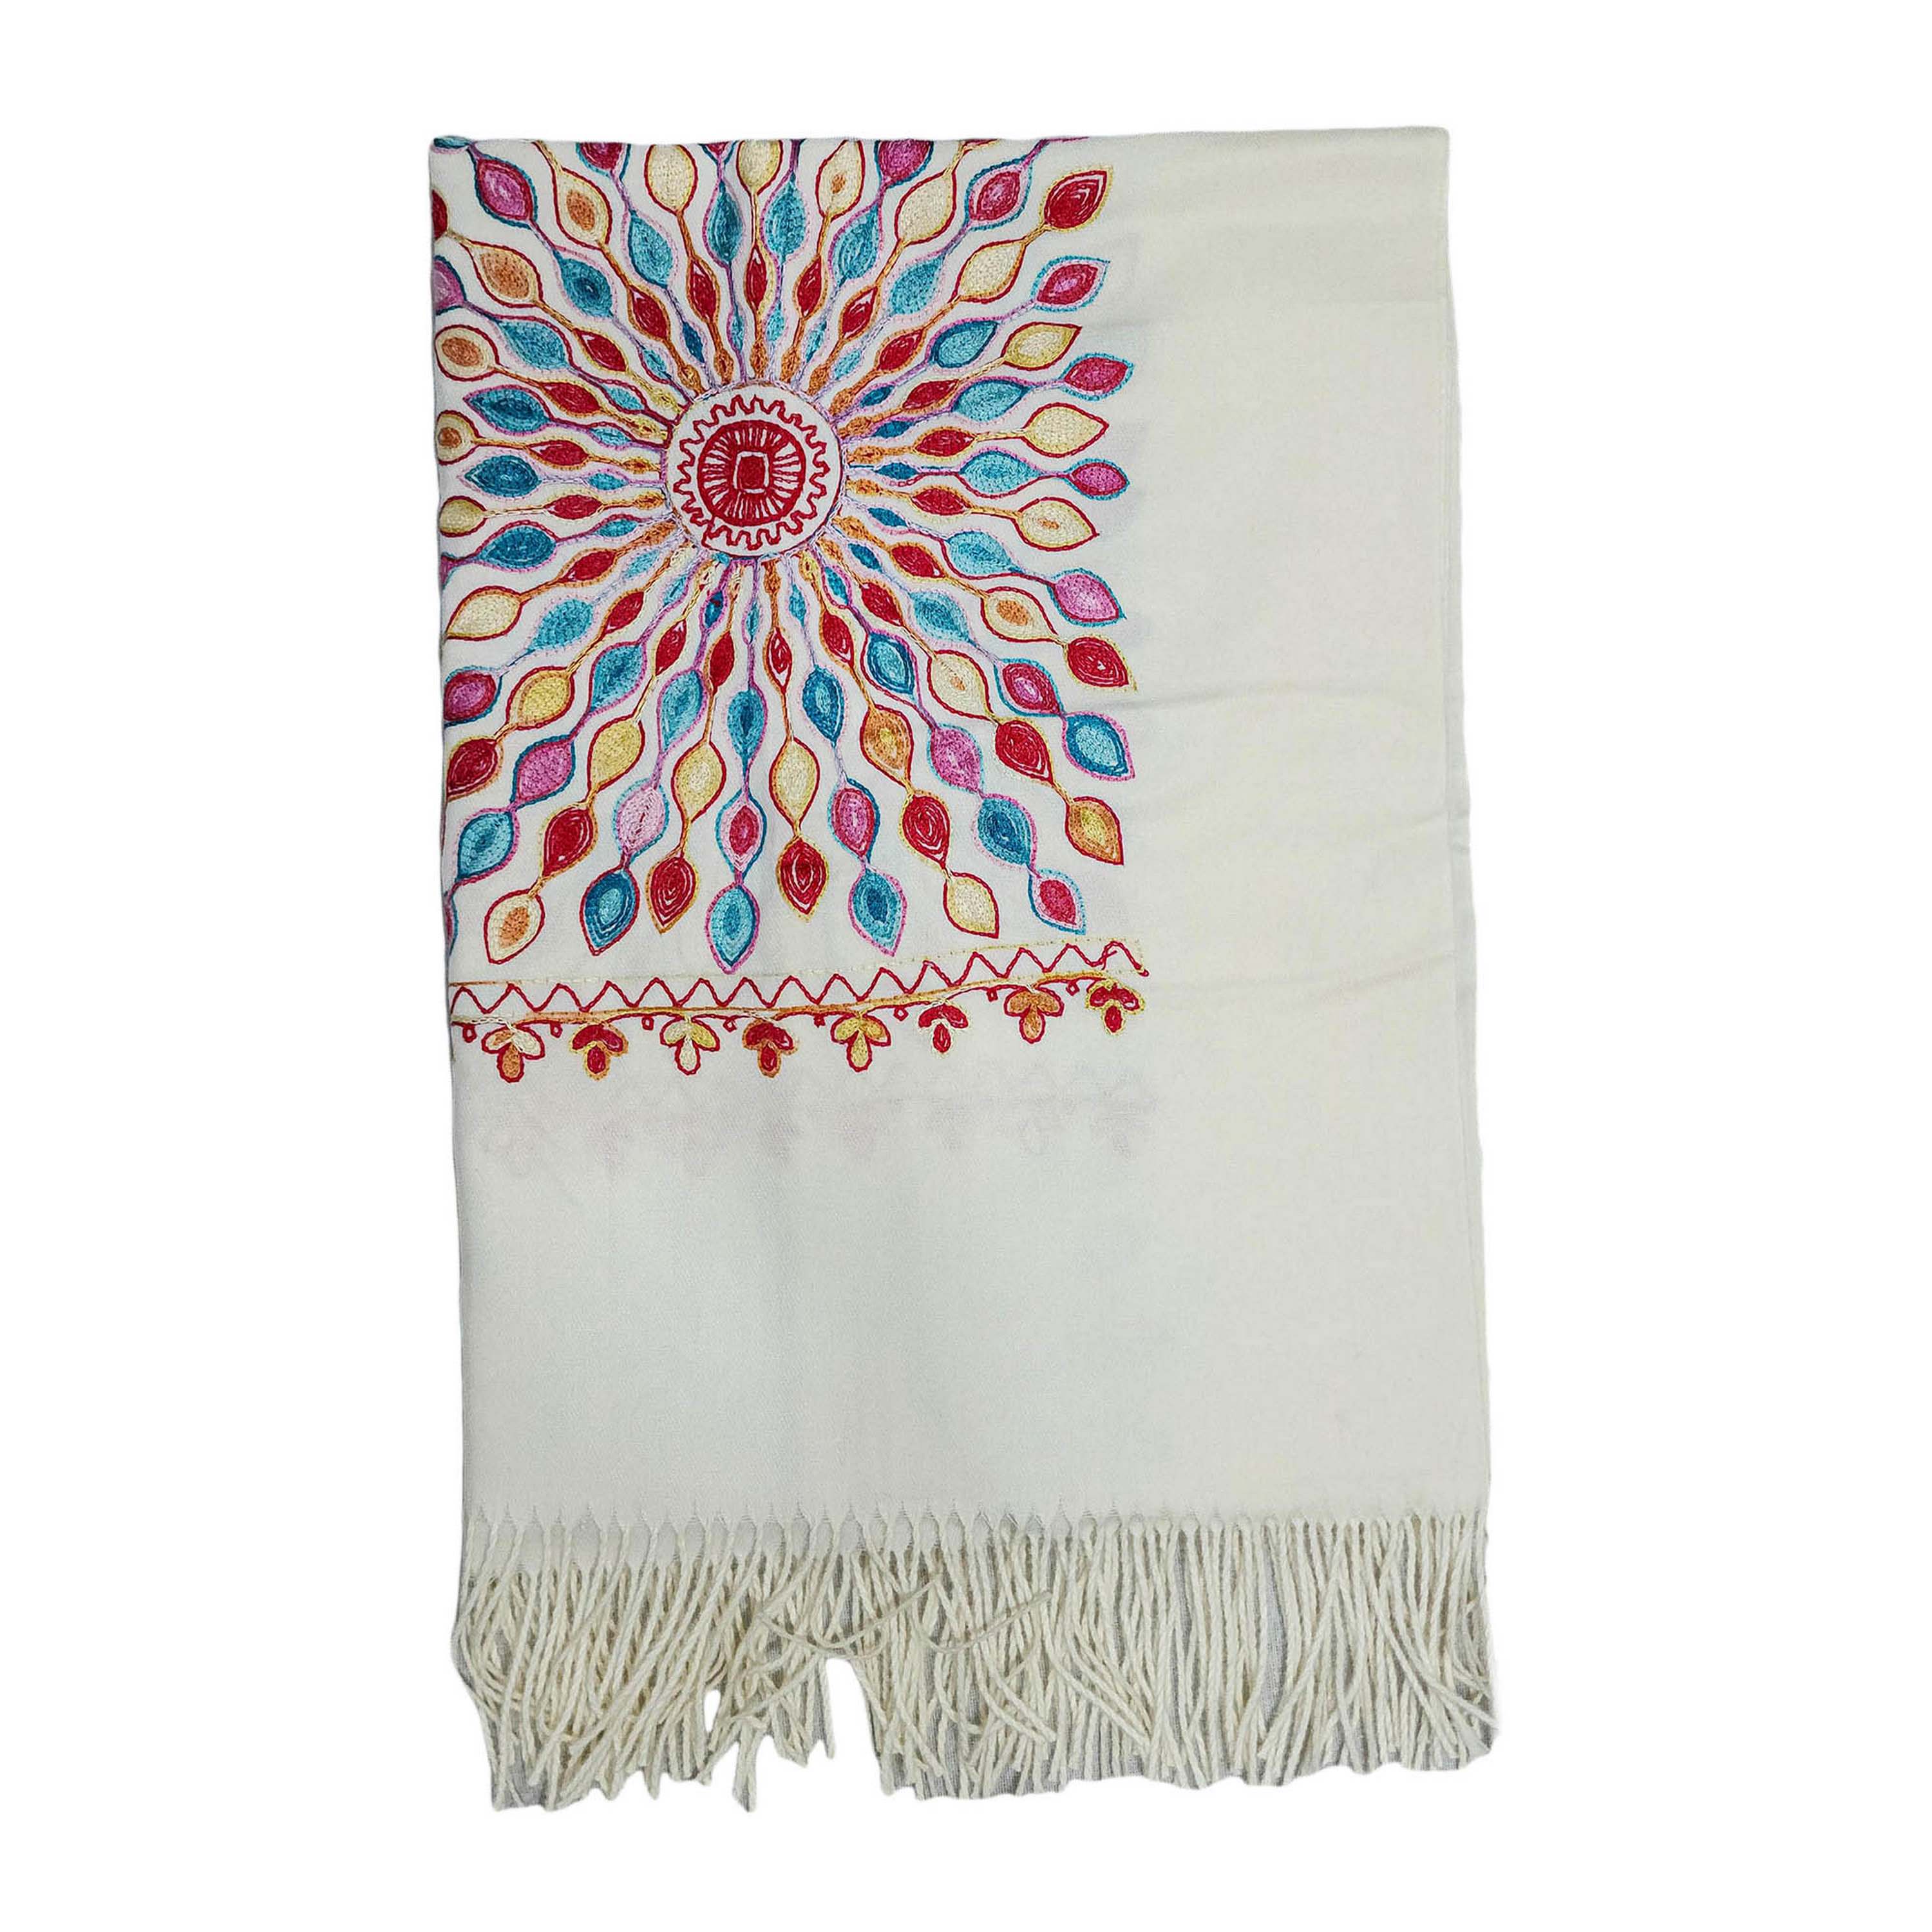 Desigener Shawl, Thick Nepali Shawl, With Heavy Embroidery, Color gray